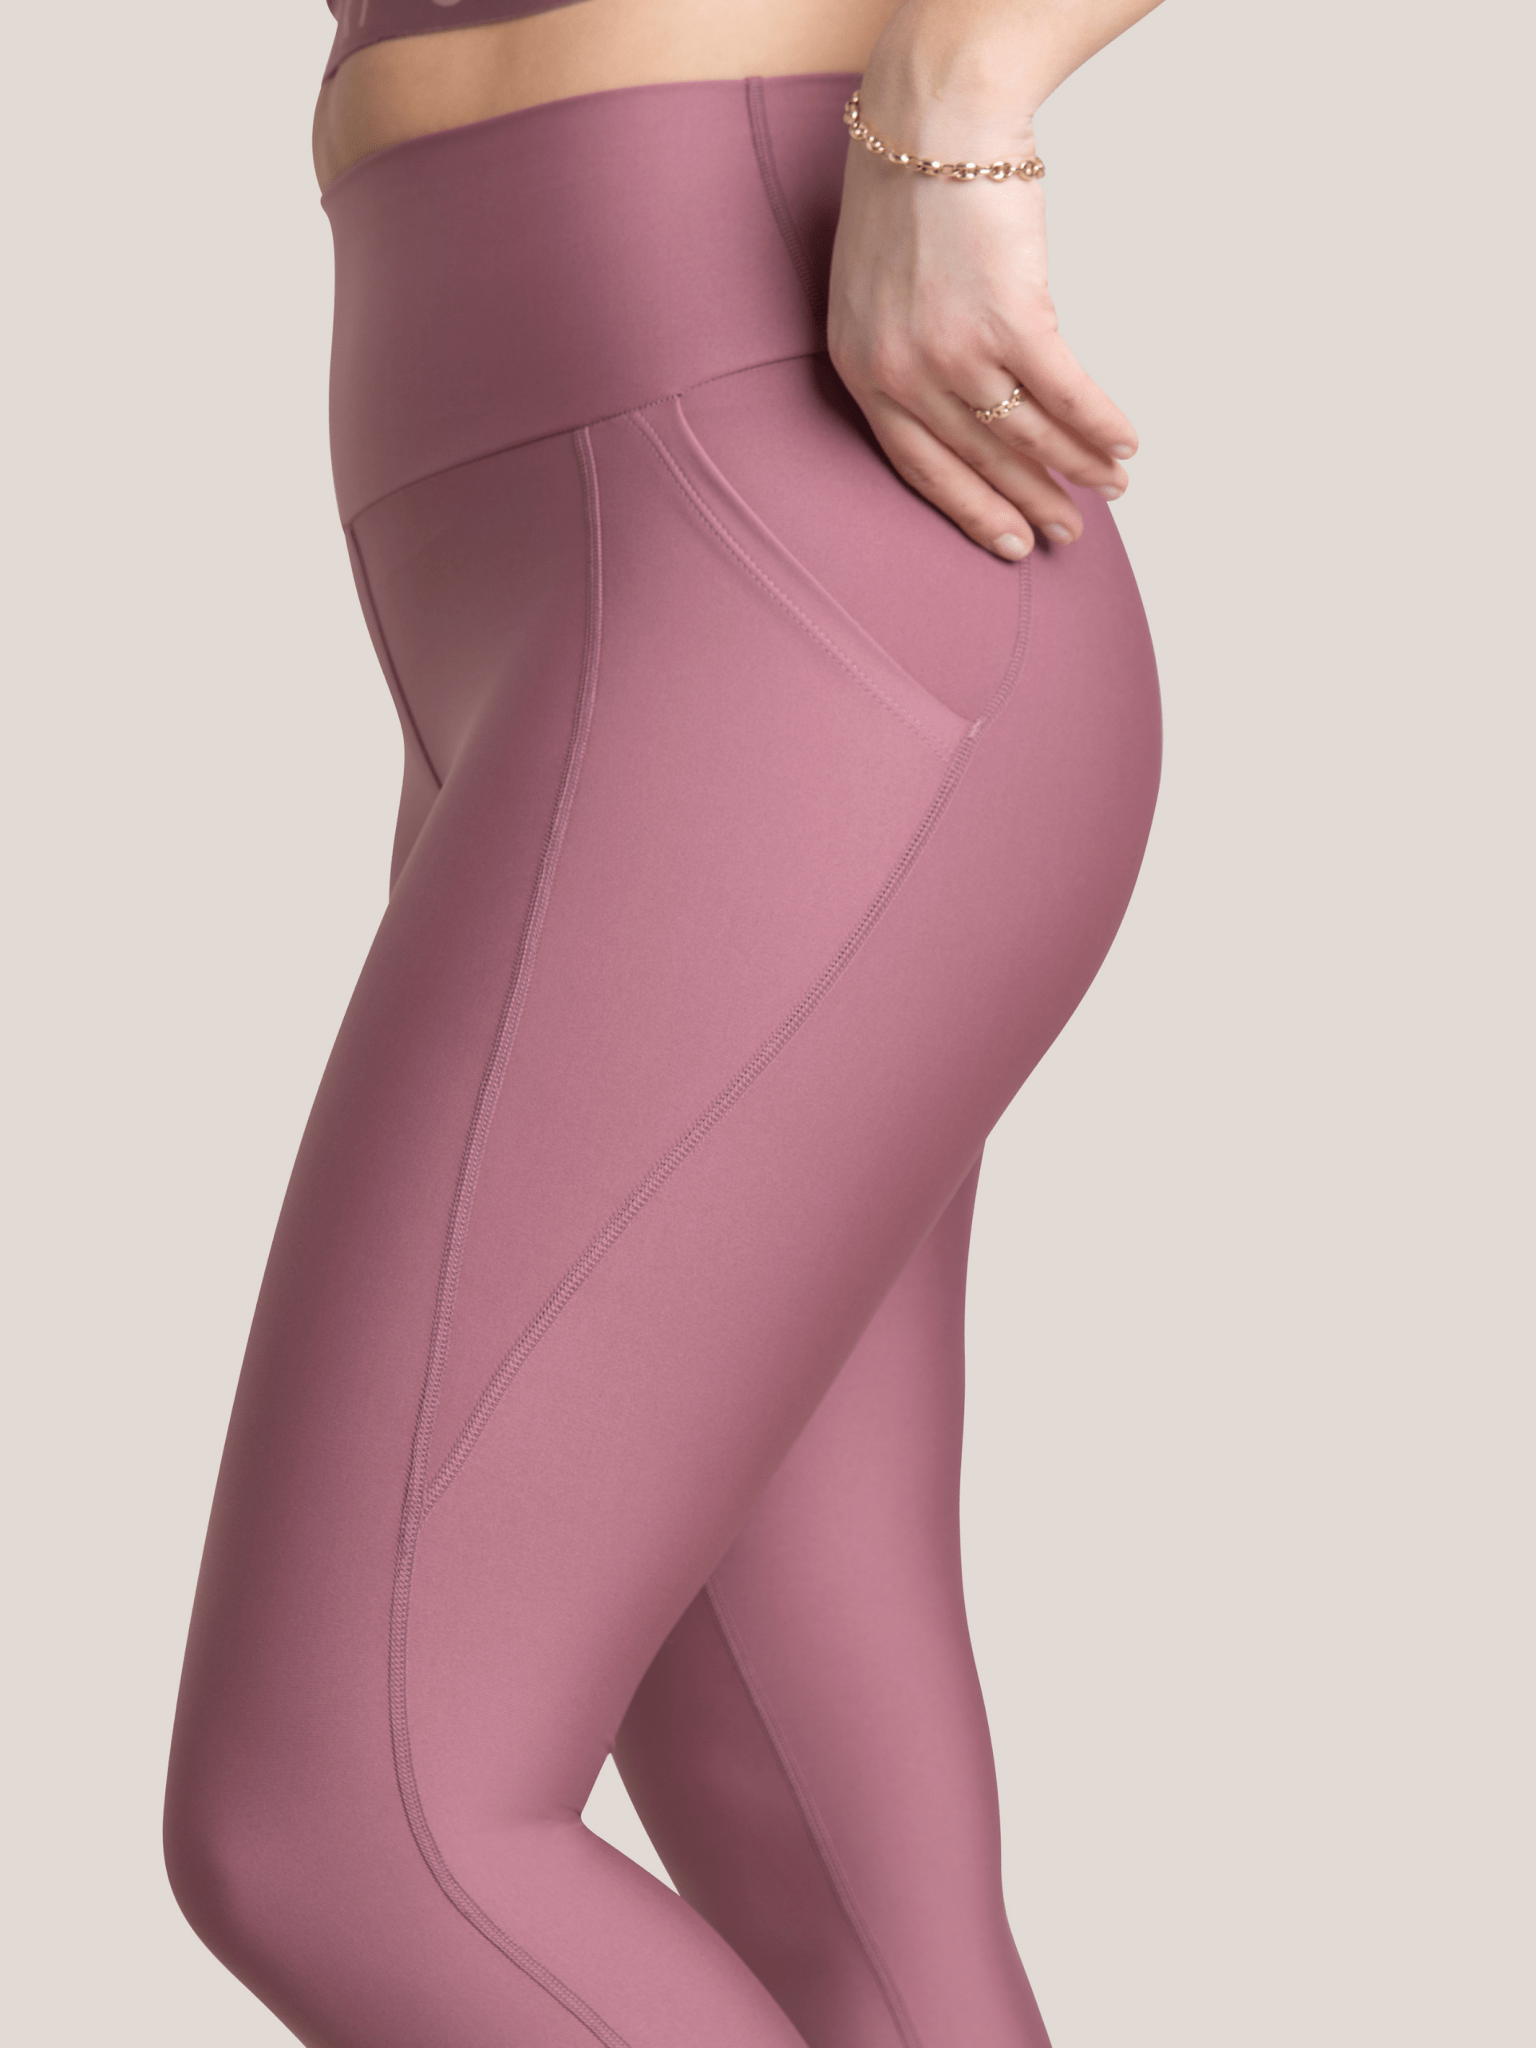 https://cdn.shopify.com/s/files/1/0468/2196/5975/products/ecomove-poches-dusty-mauve-leggings-753913.png?v=1695255465